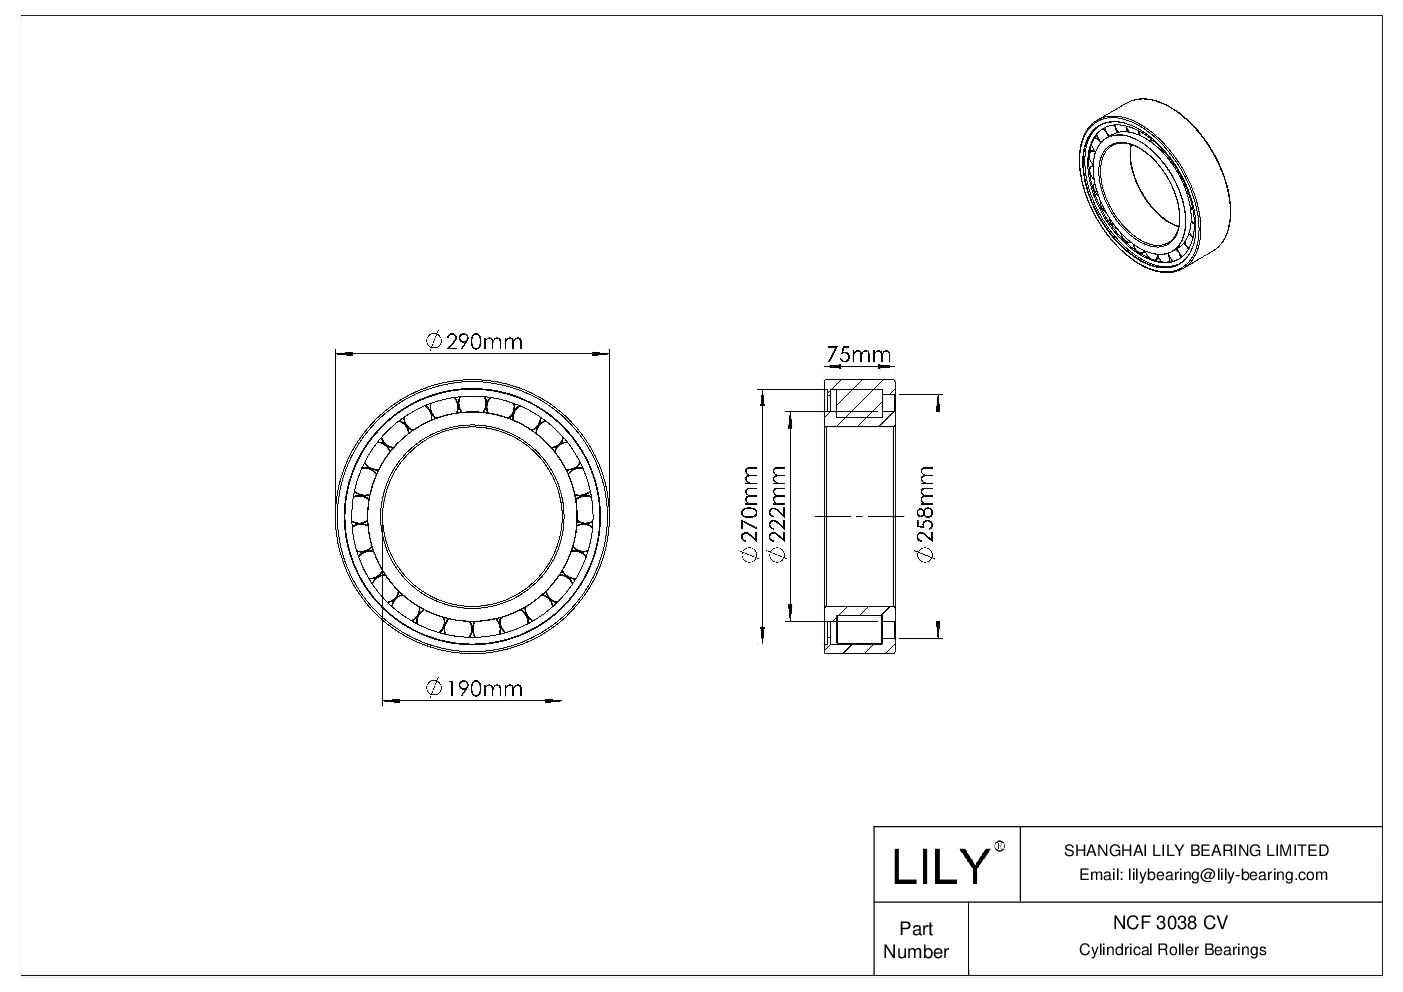 NCF 3038 CV Single Row Full Complement Cylindrical Roller Bearings cad drawing